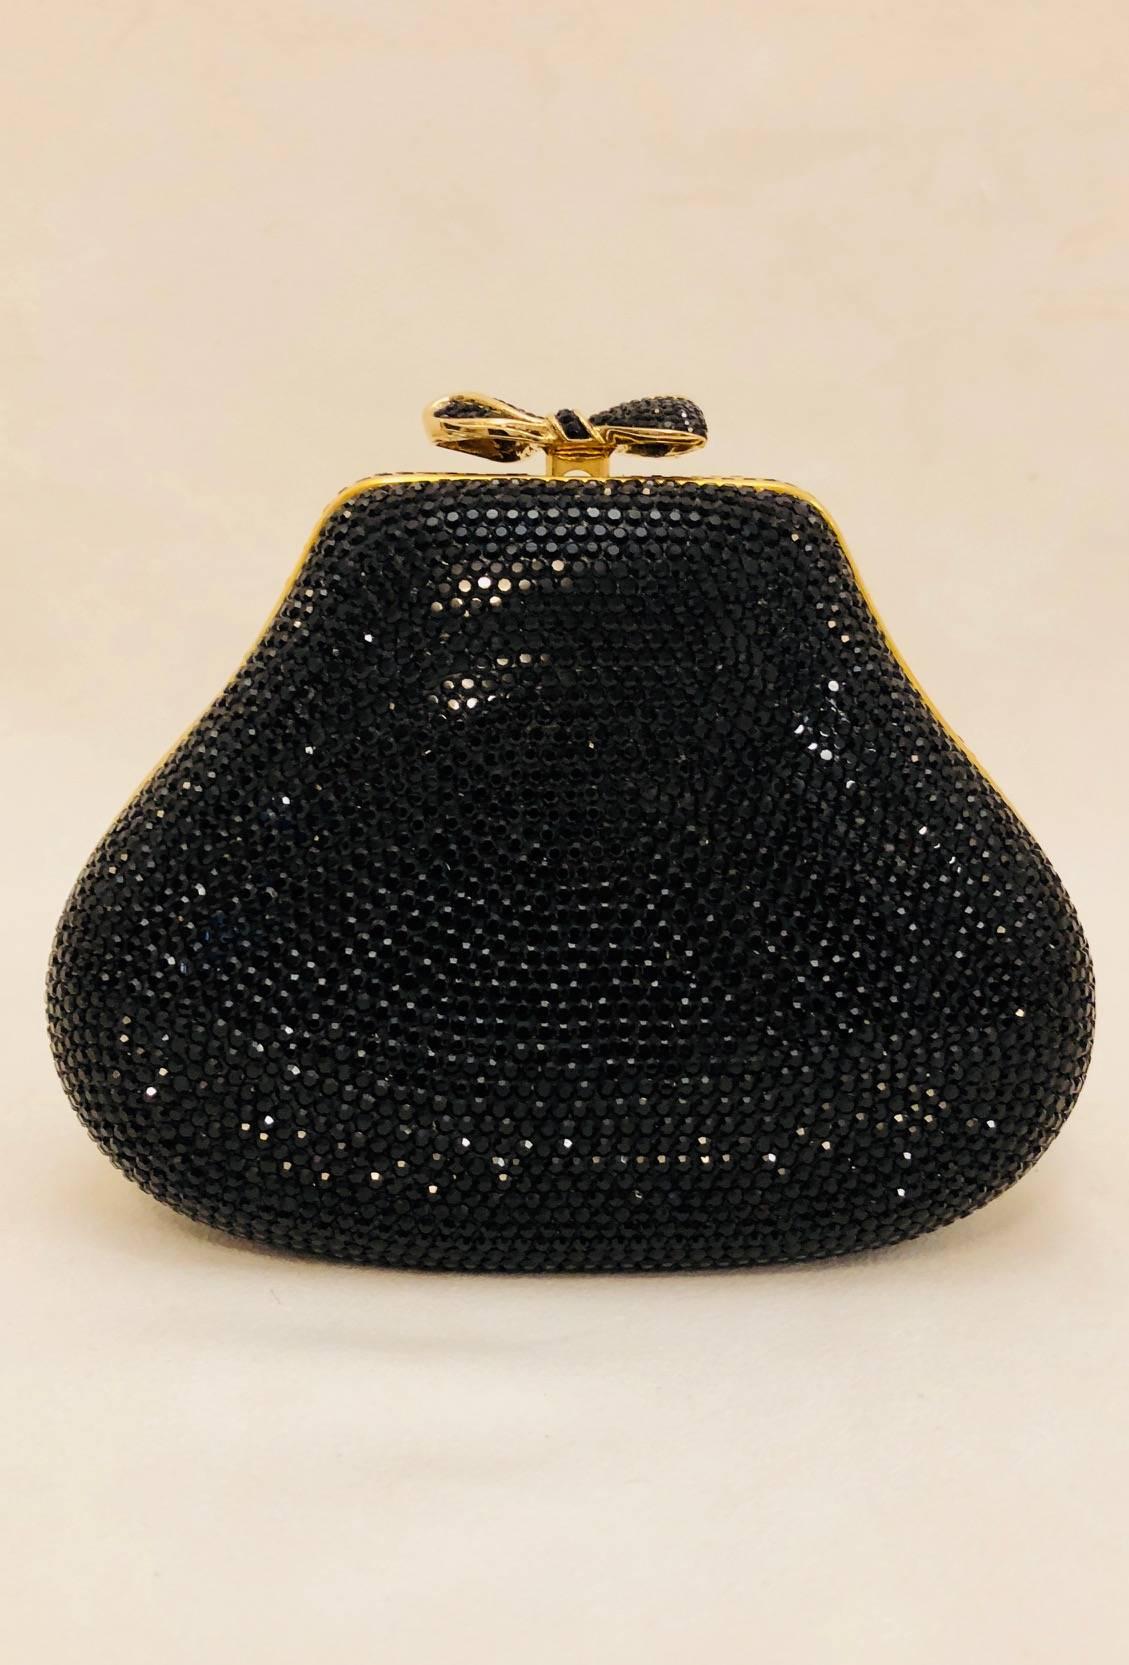 Jeweled Judith Leiber Black Swarovski Crystal Minaudiere with Gold Tone Hardware In Excellent Condition In Palm Beach, FL